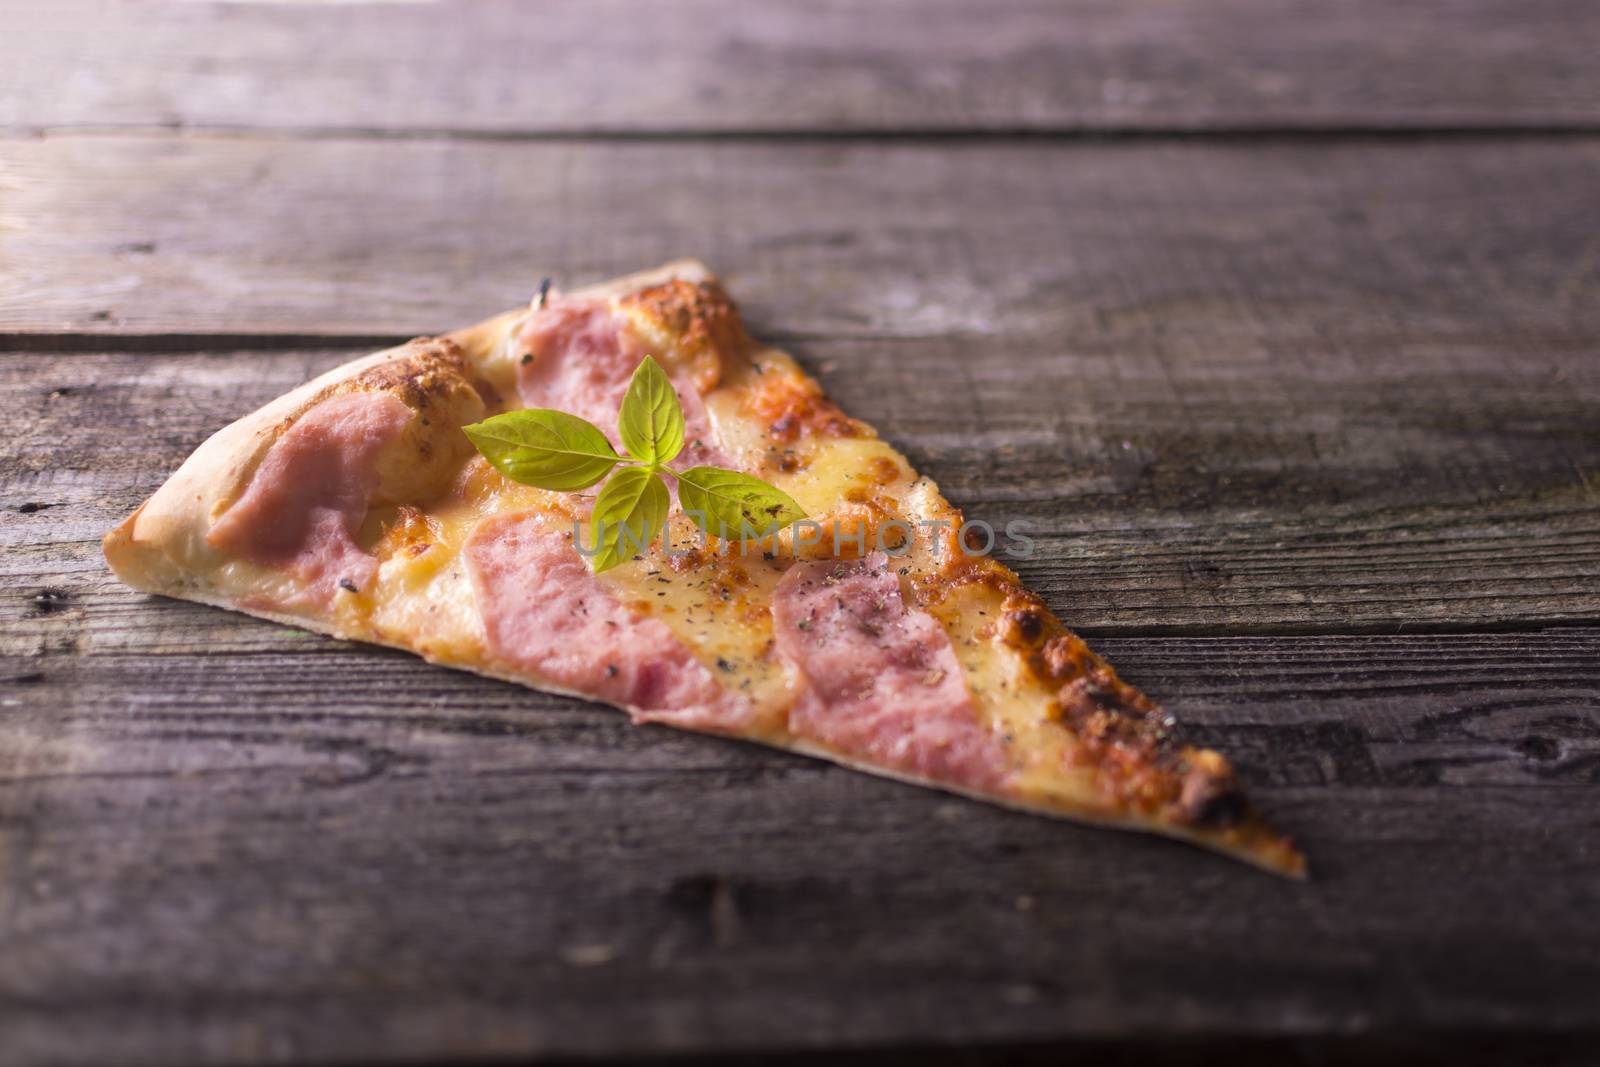 Piece of Basil on hot pizza, wooden background by adamr